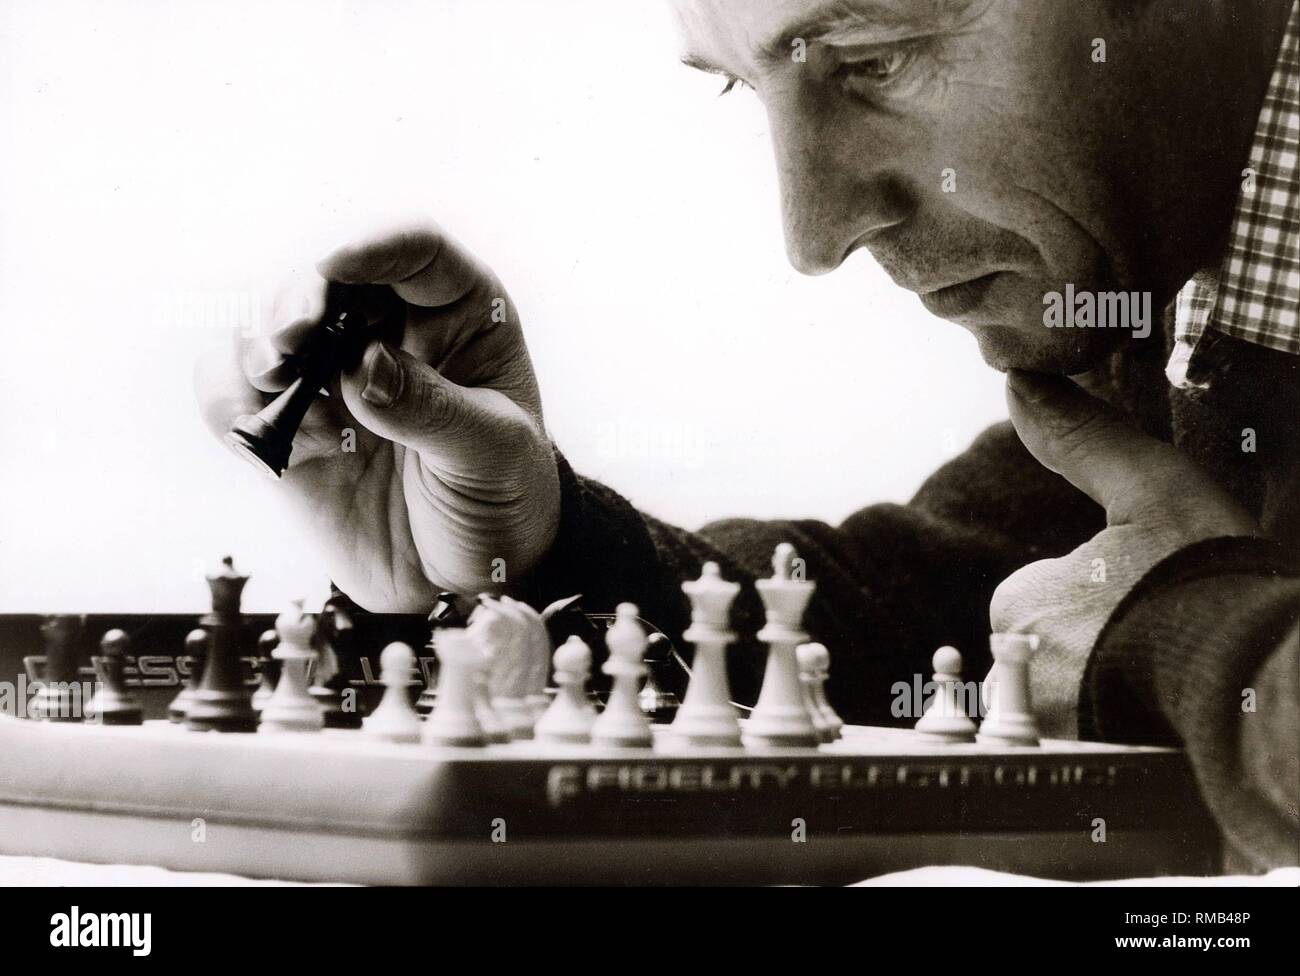 Concentration during a chess game with the computer 'Chess Challenger', 1981. Stock Photo